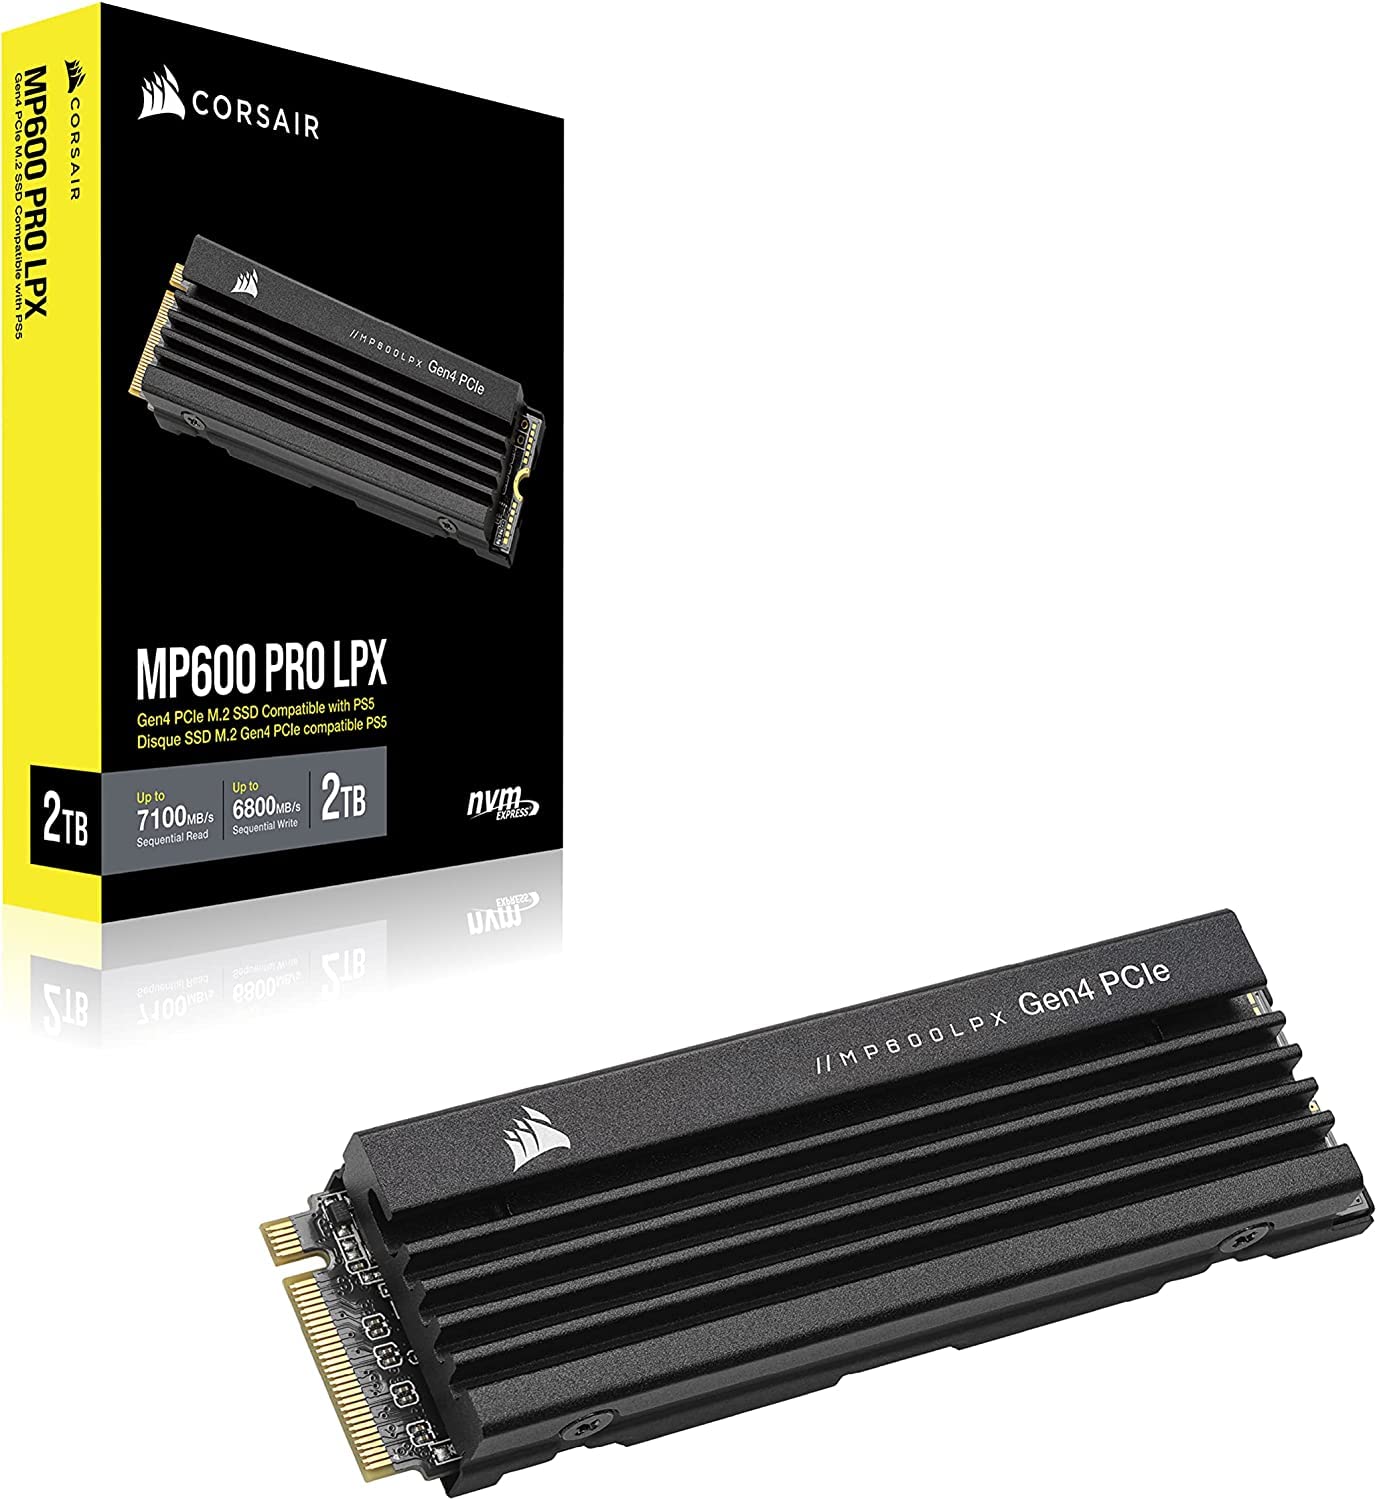 Corsair MP600 PRO LPX 2TB M.2 NVMe PCIe x4 Gen4 SSD - Optimized for PS5 (Up to 7,100MB/sec Sequential Read & 6,800MB/sec Sequential Write Speeds, High-Speed Interface, Compact Form Factor) Black